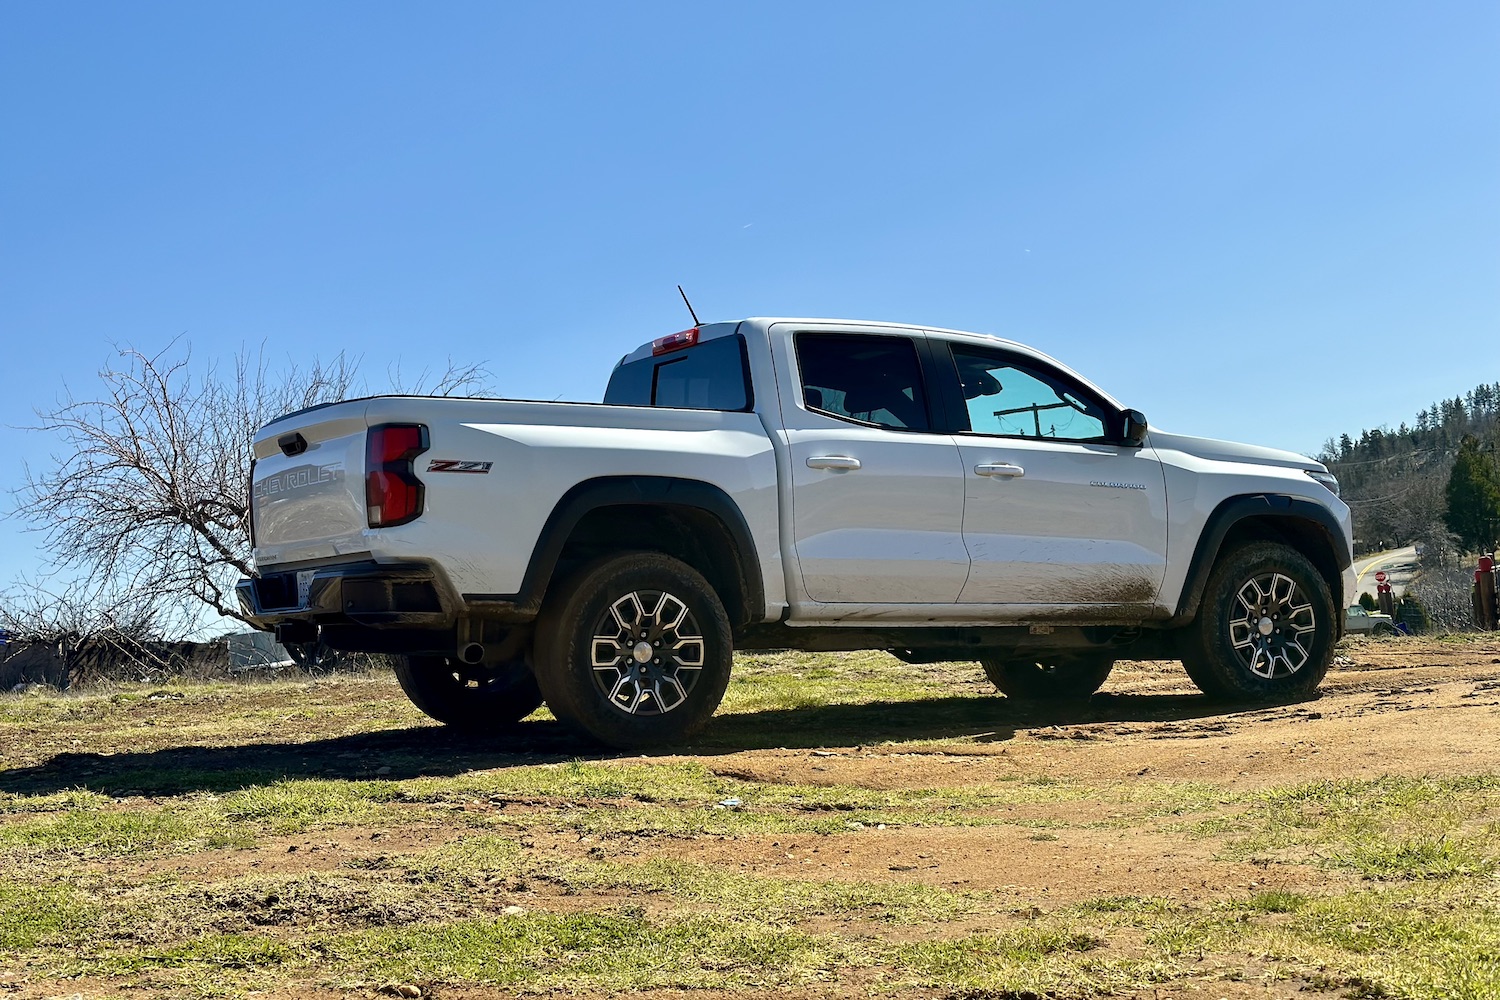 Rear end angle of the 2023 Chevrolet Colorado Z71 parked in a muddy field with trees in the back.